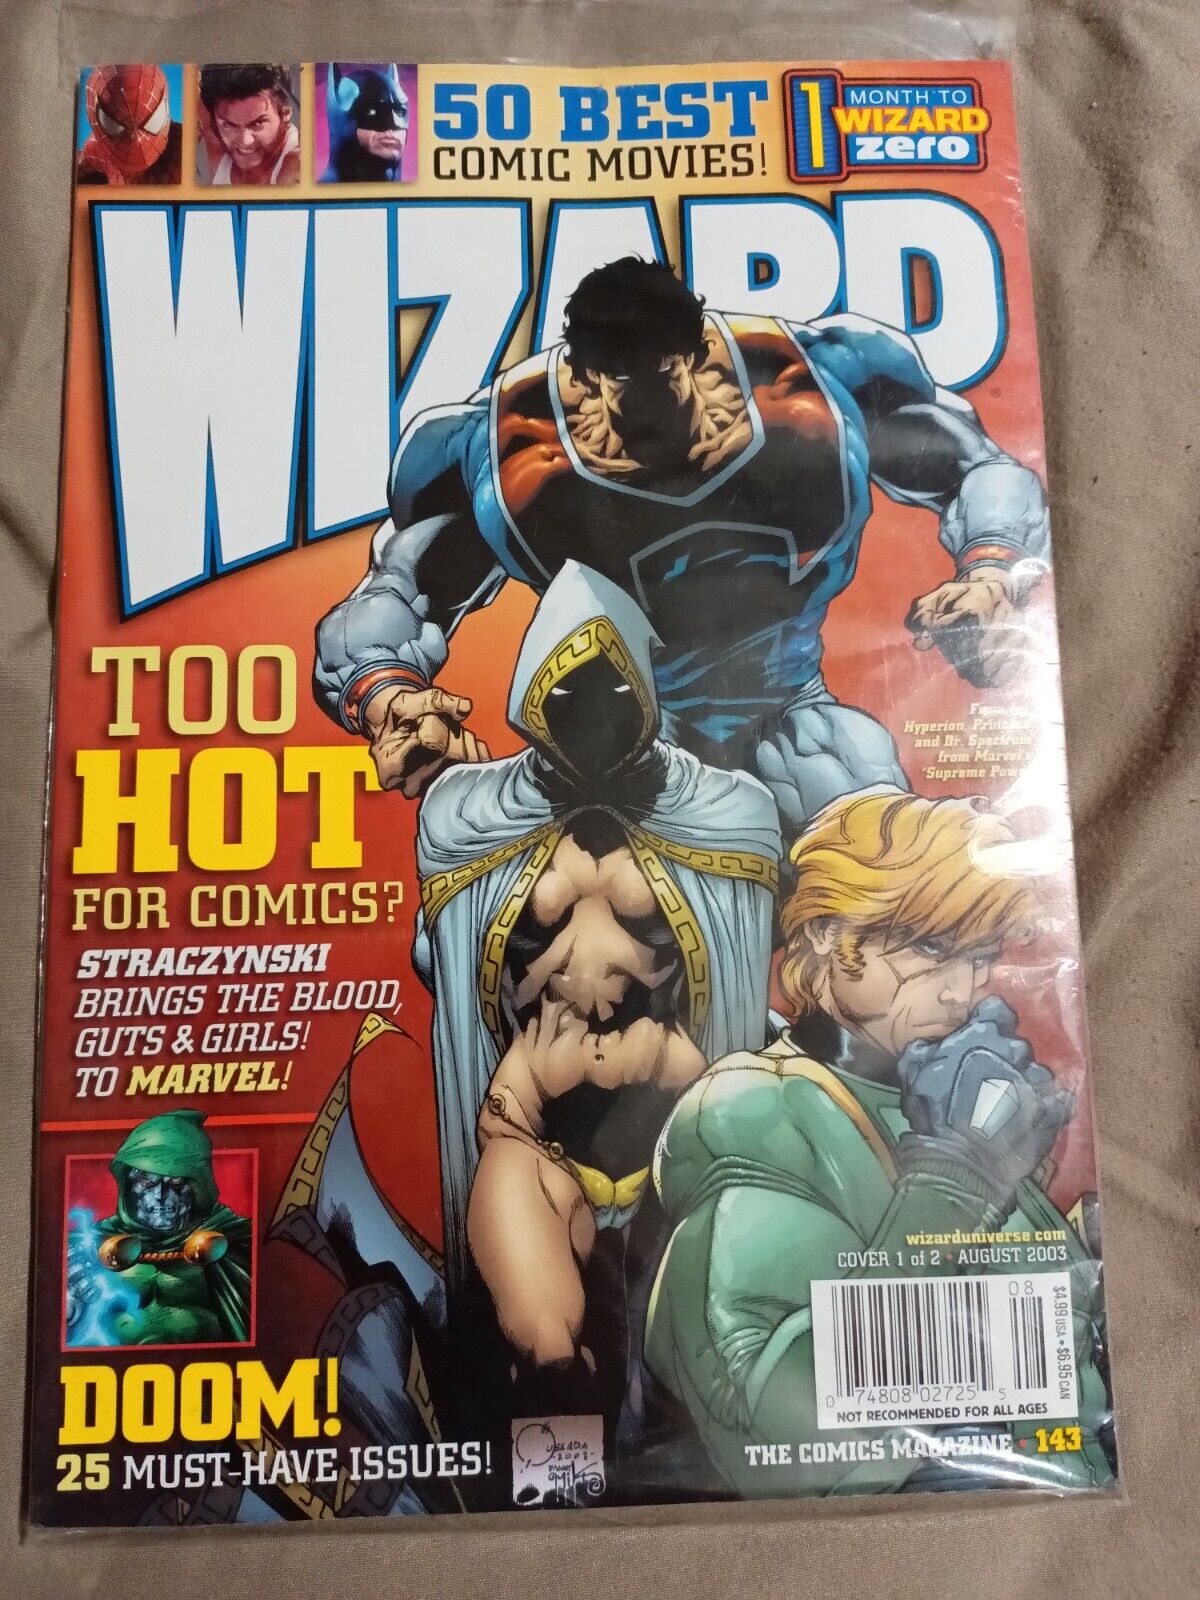 Wizard Cover 1 of 2 August 2003 Comic